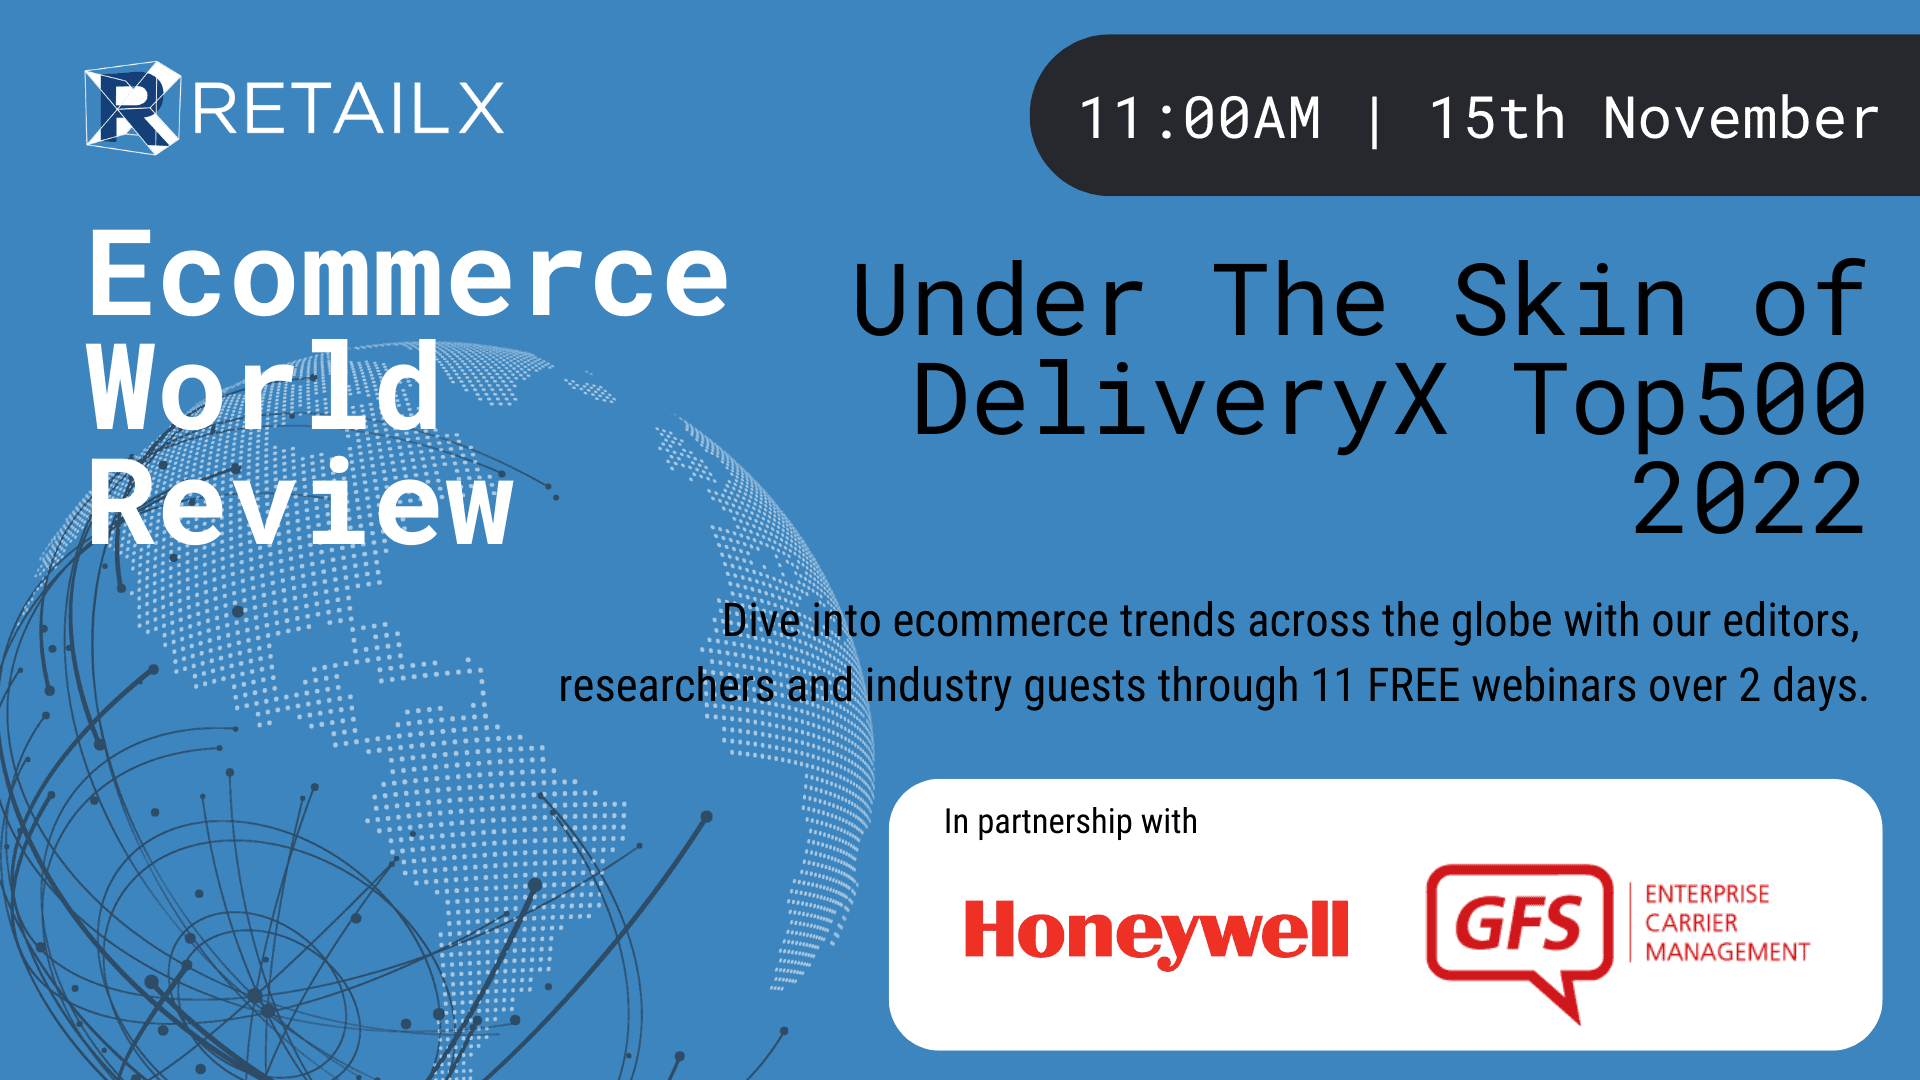 Under The Skin of DeliveryX Top500 2022